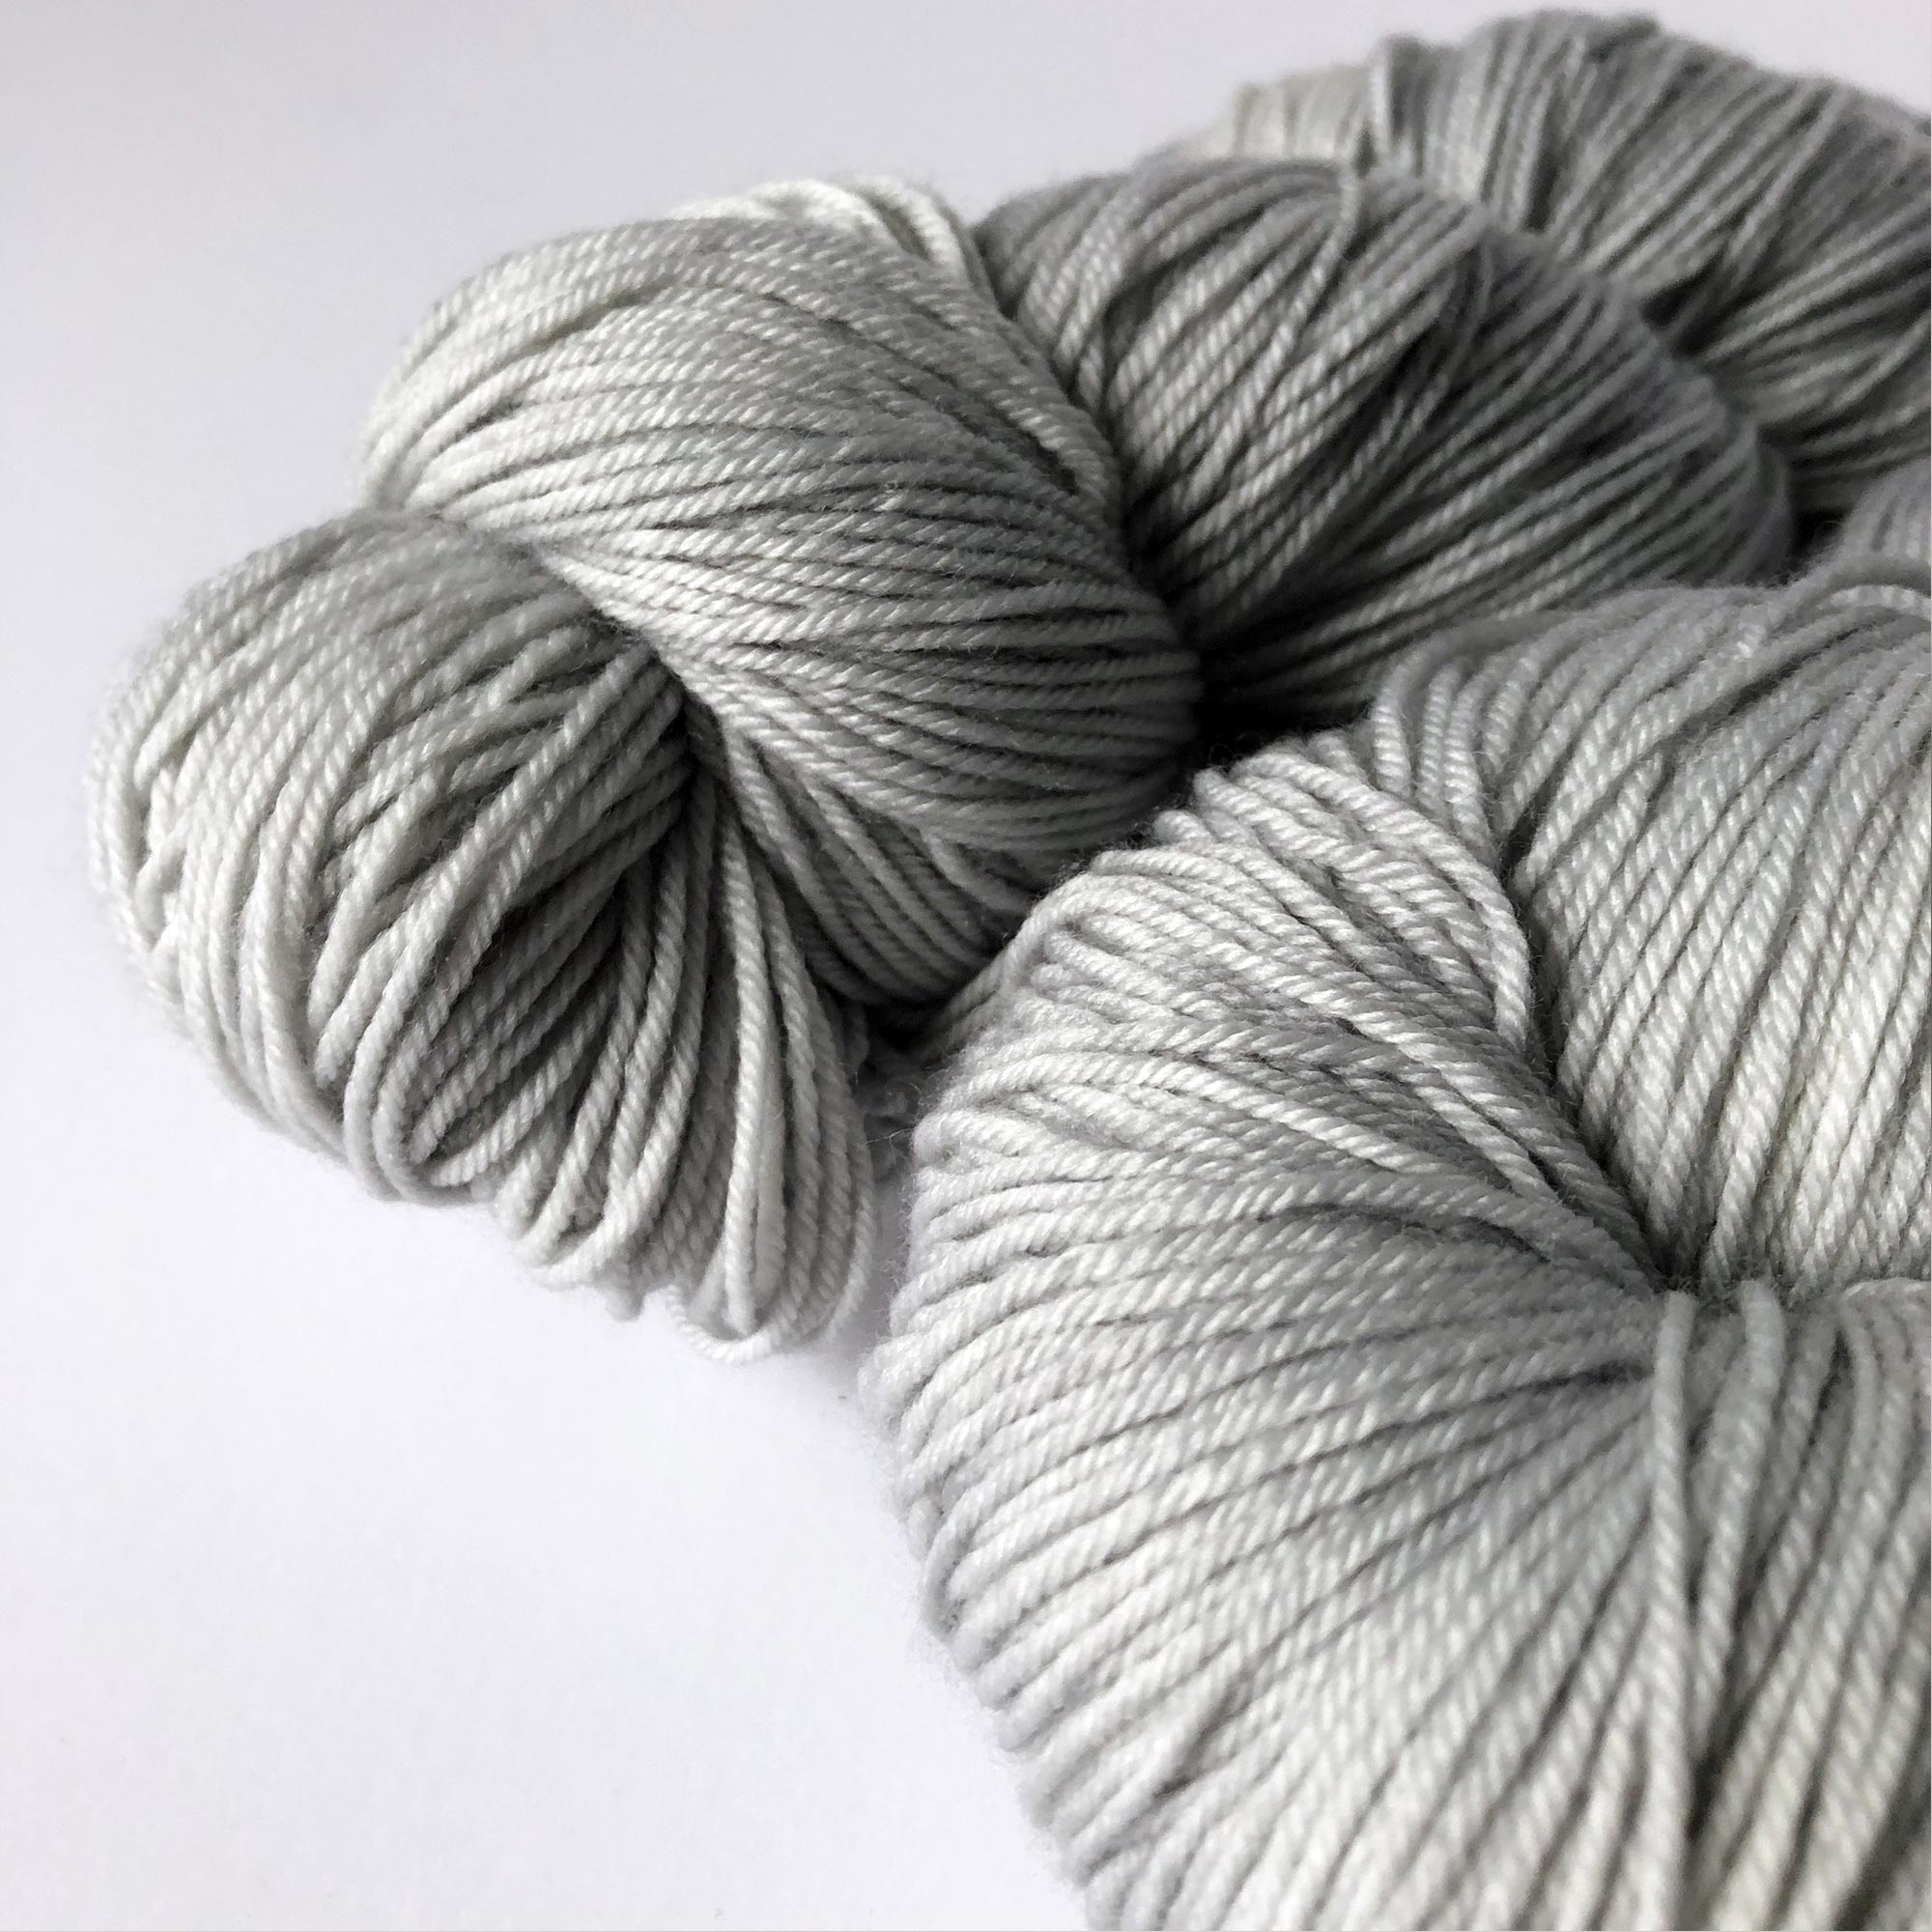 close-up of artisan yarn in gray "silver lining"  colorway